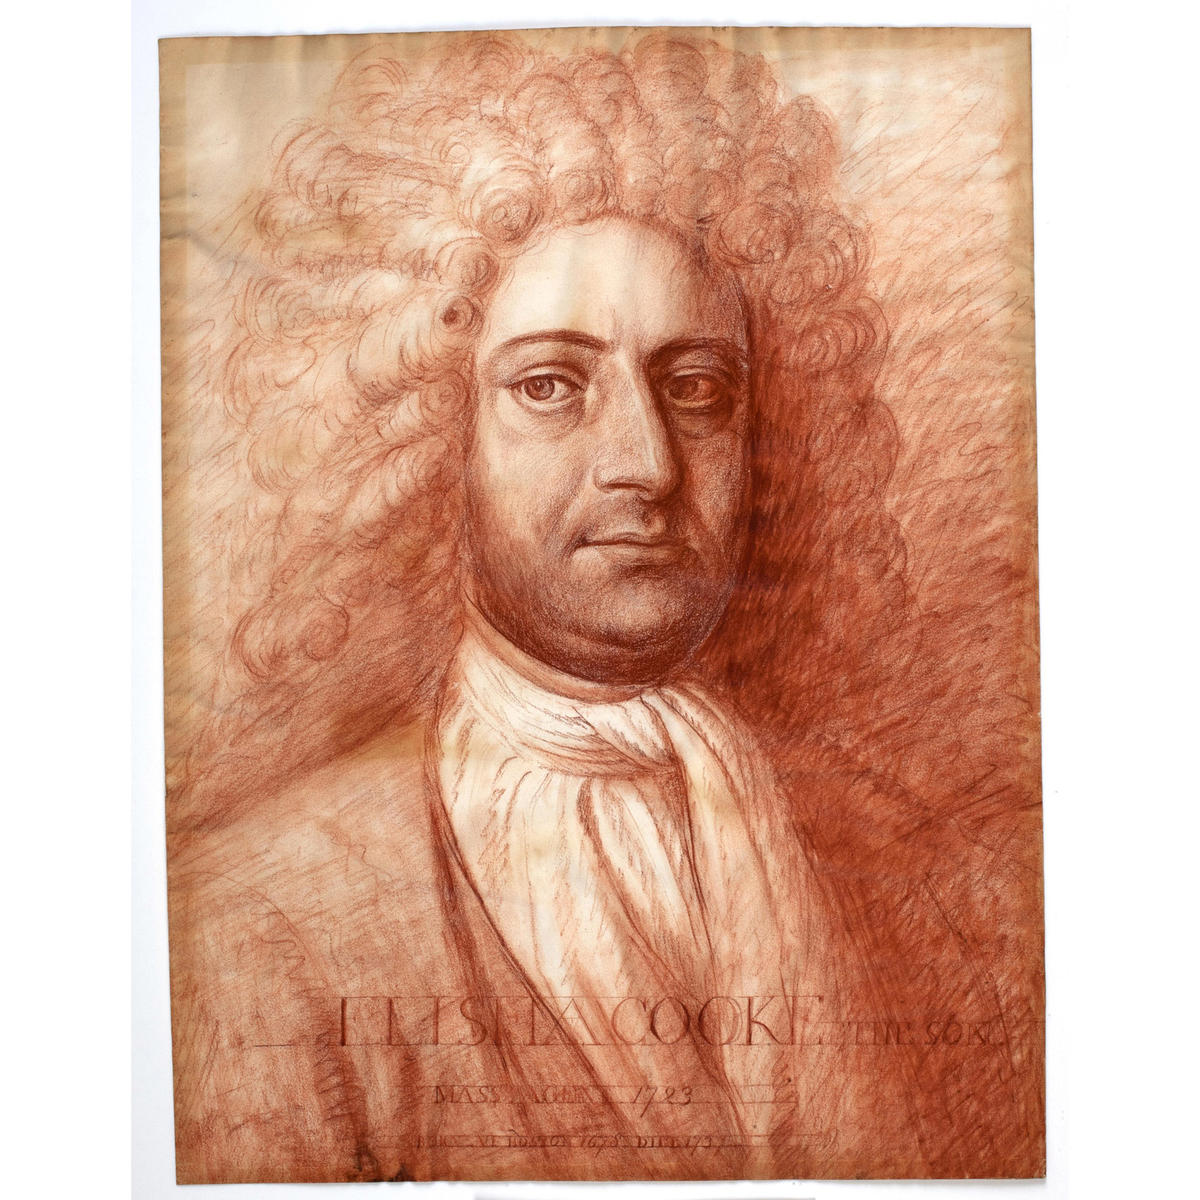 A sketch of a man from the chest up. He is wearing a long curly wig, a frock coat, and a scarf around his throat tied at the front. Text at the bottom reads "Elisha Cooke" with a birthdate of 1678 and a death date of 1737.